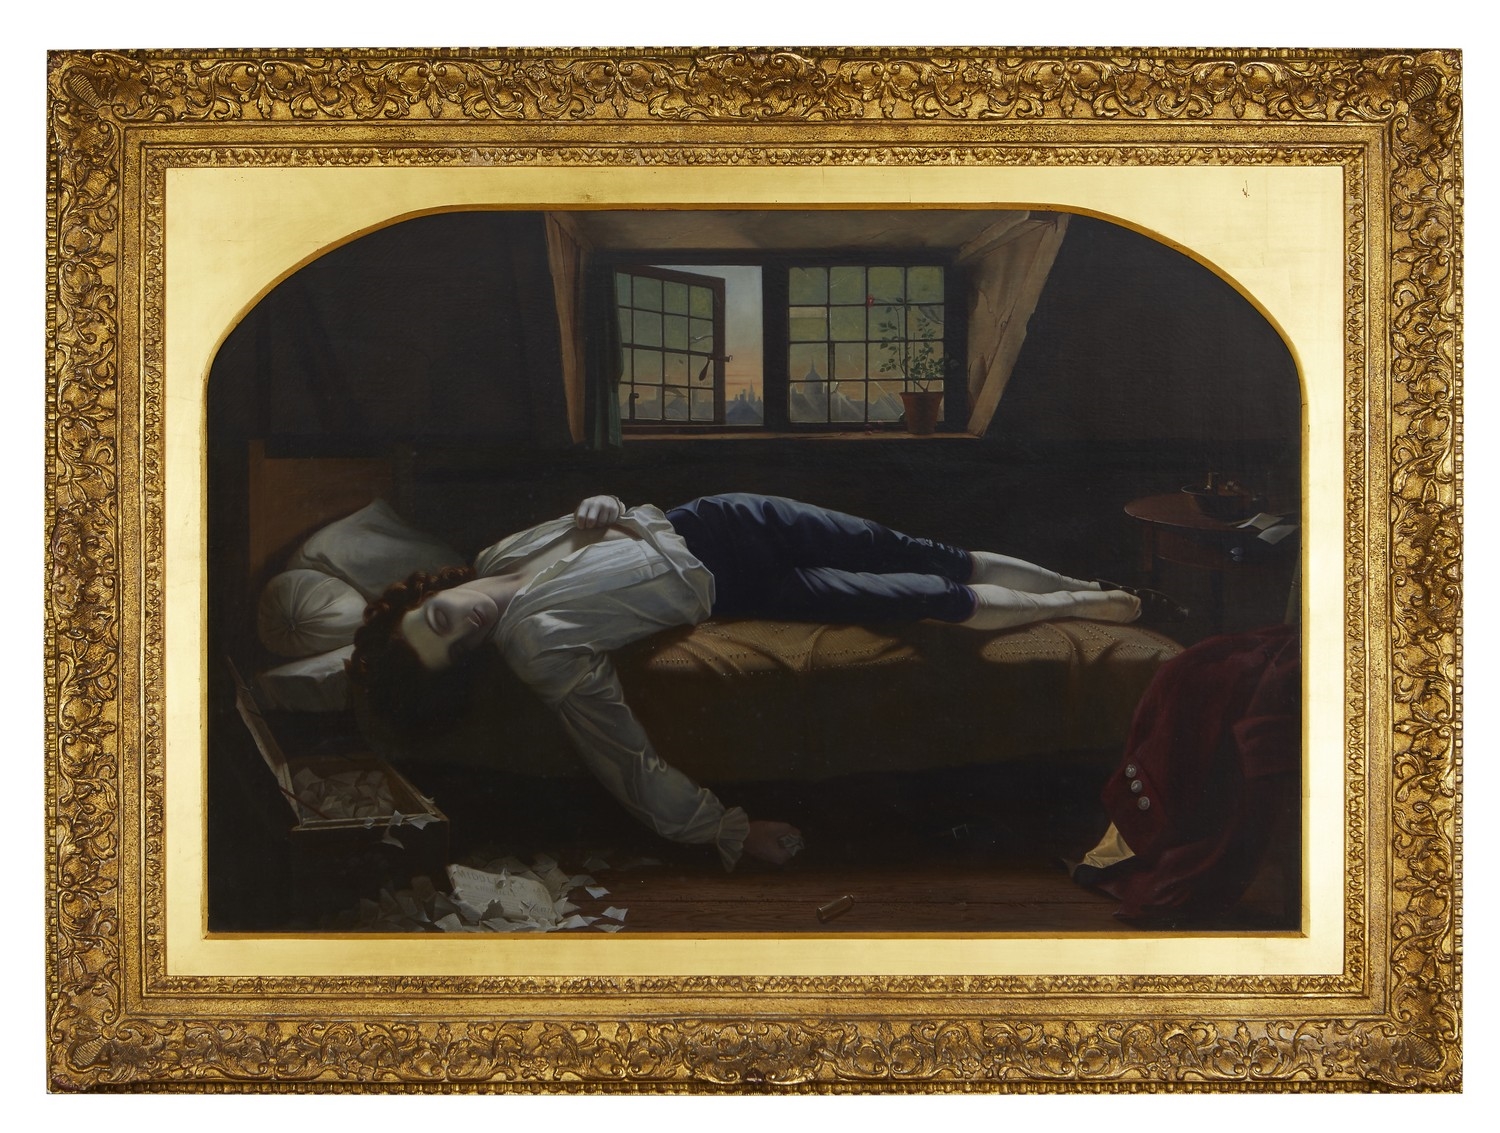 Death Of Chatterton by Henry Wallis: History, Analysis & Facts